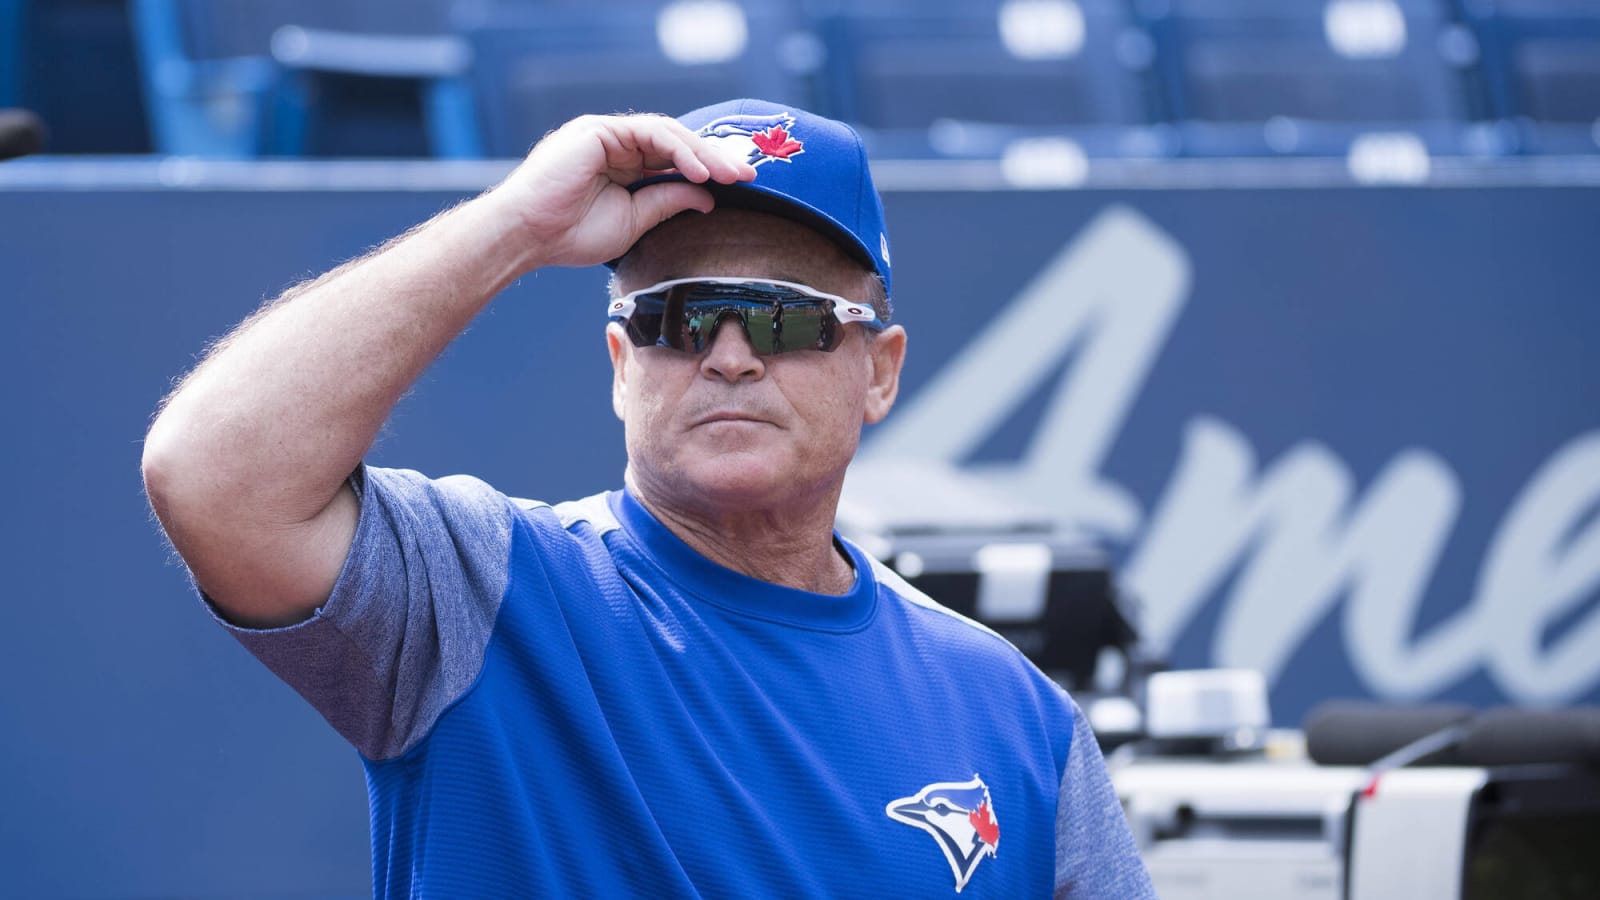 Former Blue Jays manager John Gibbons to join Mets as bench coach